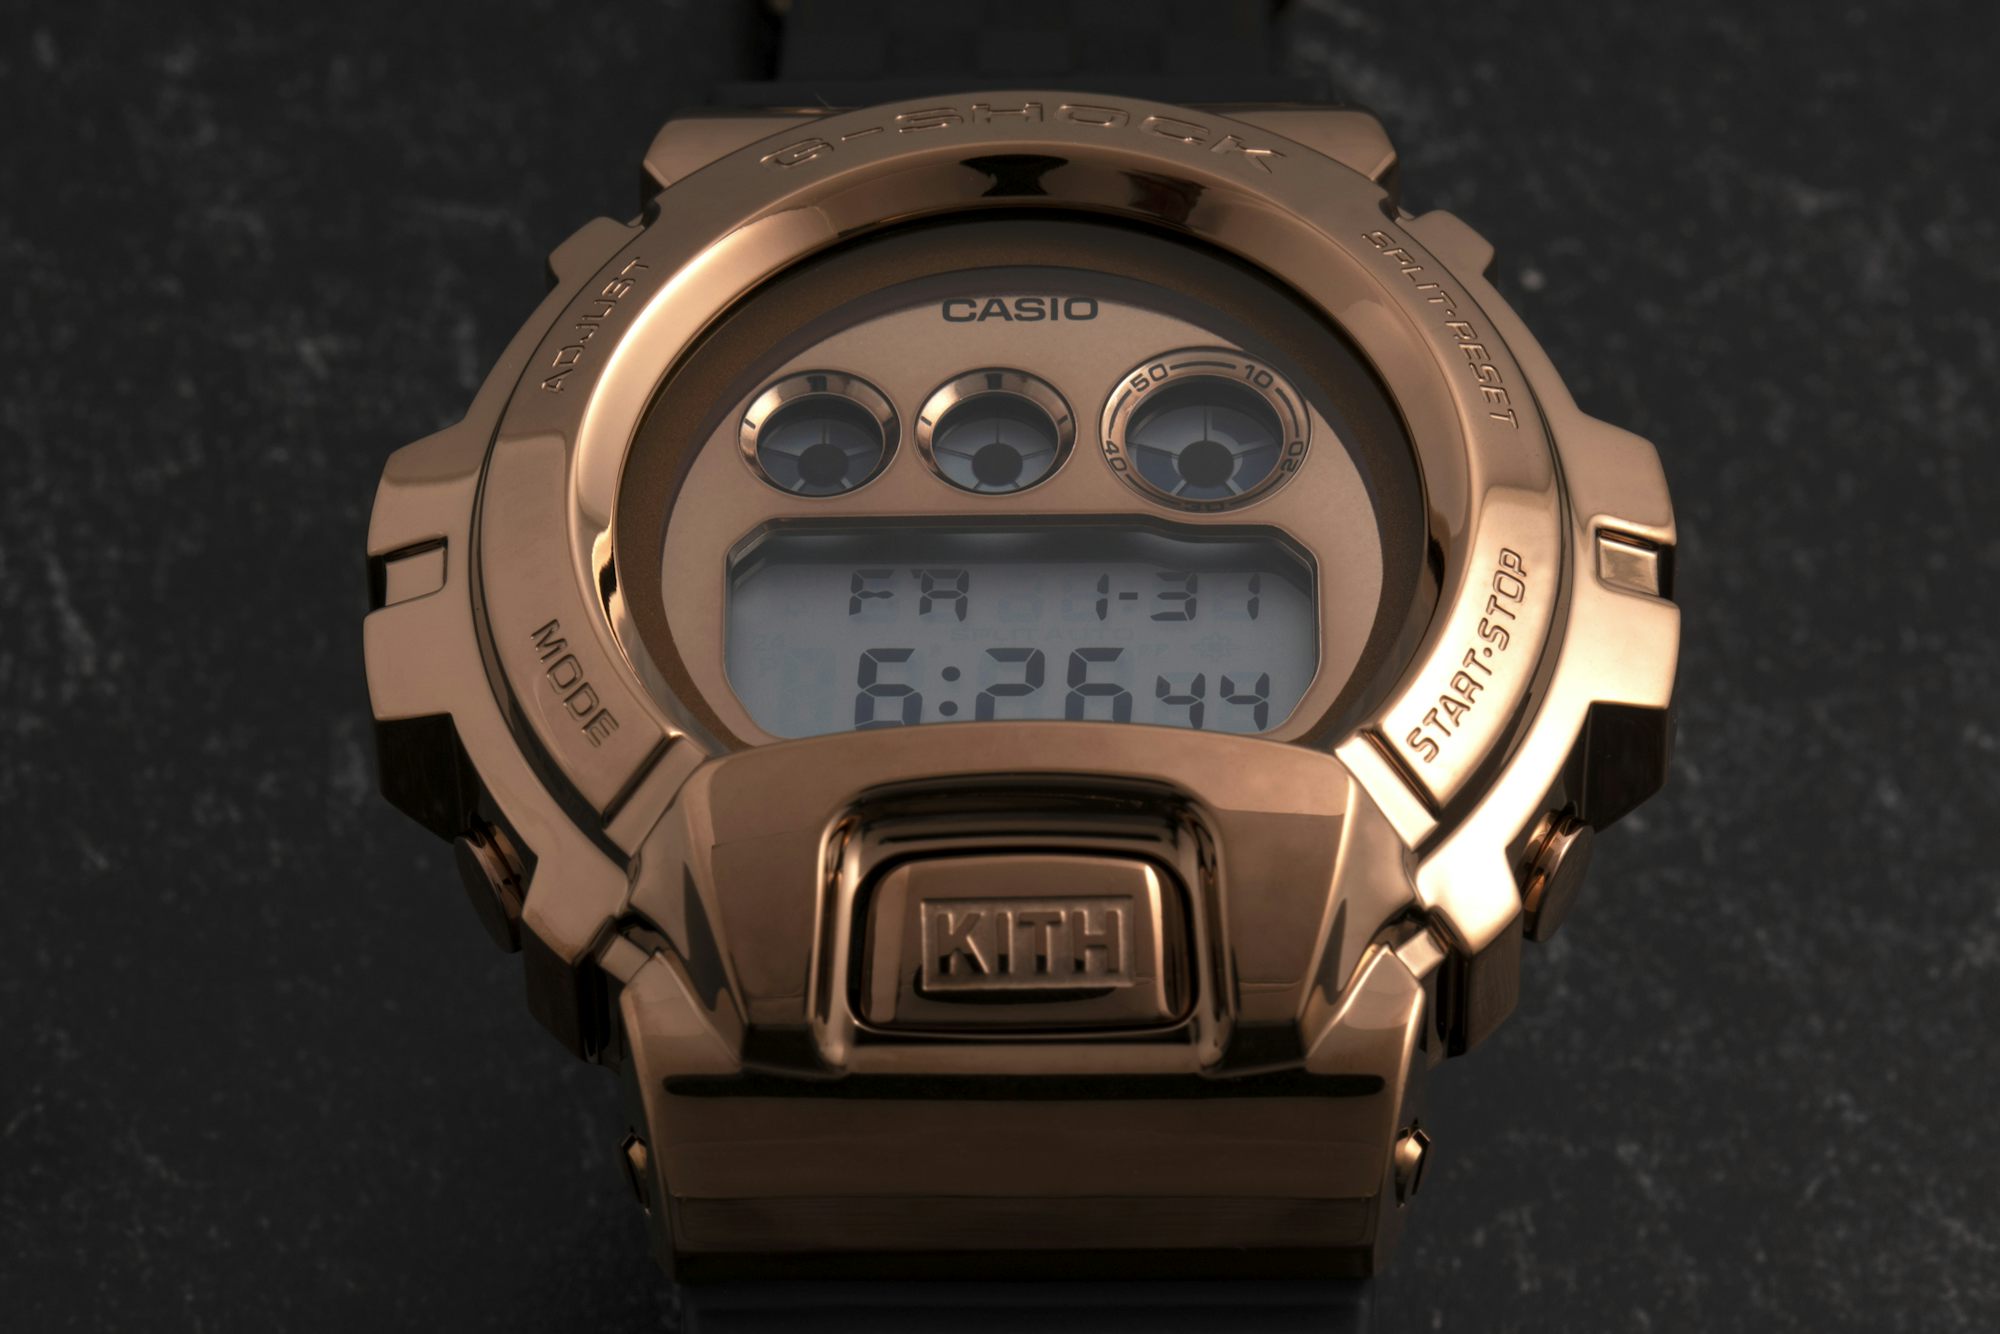 Introducing: The KITH x G-Shock GM6900 Rose Gold - Wristwatch News